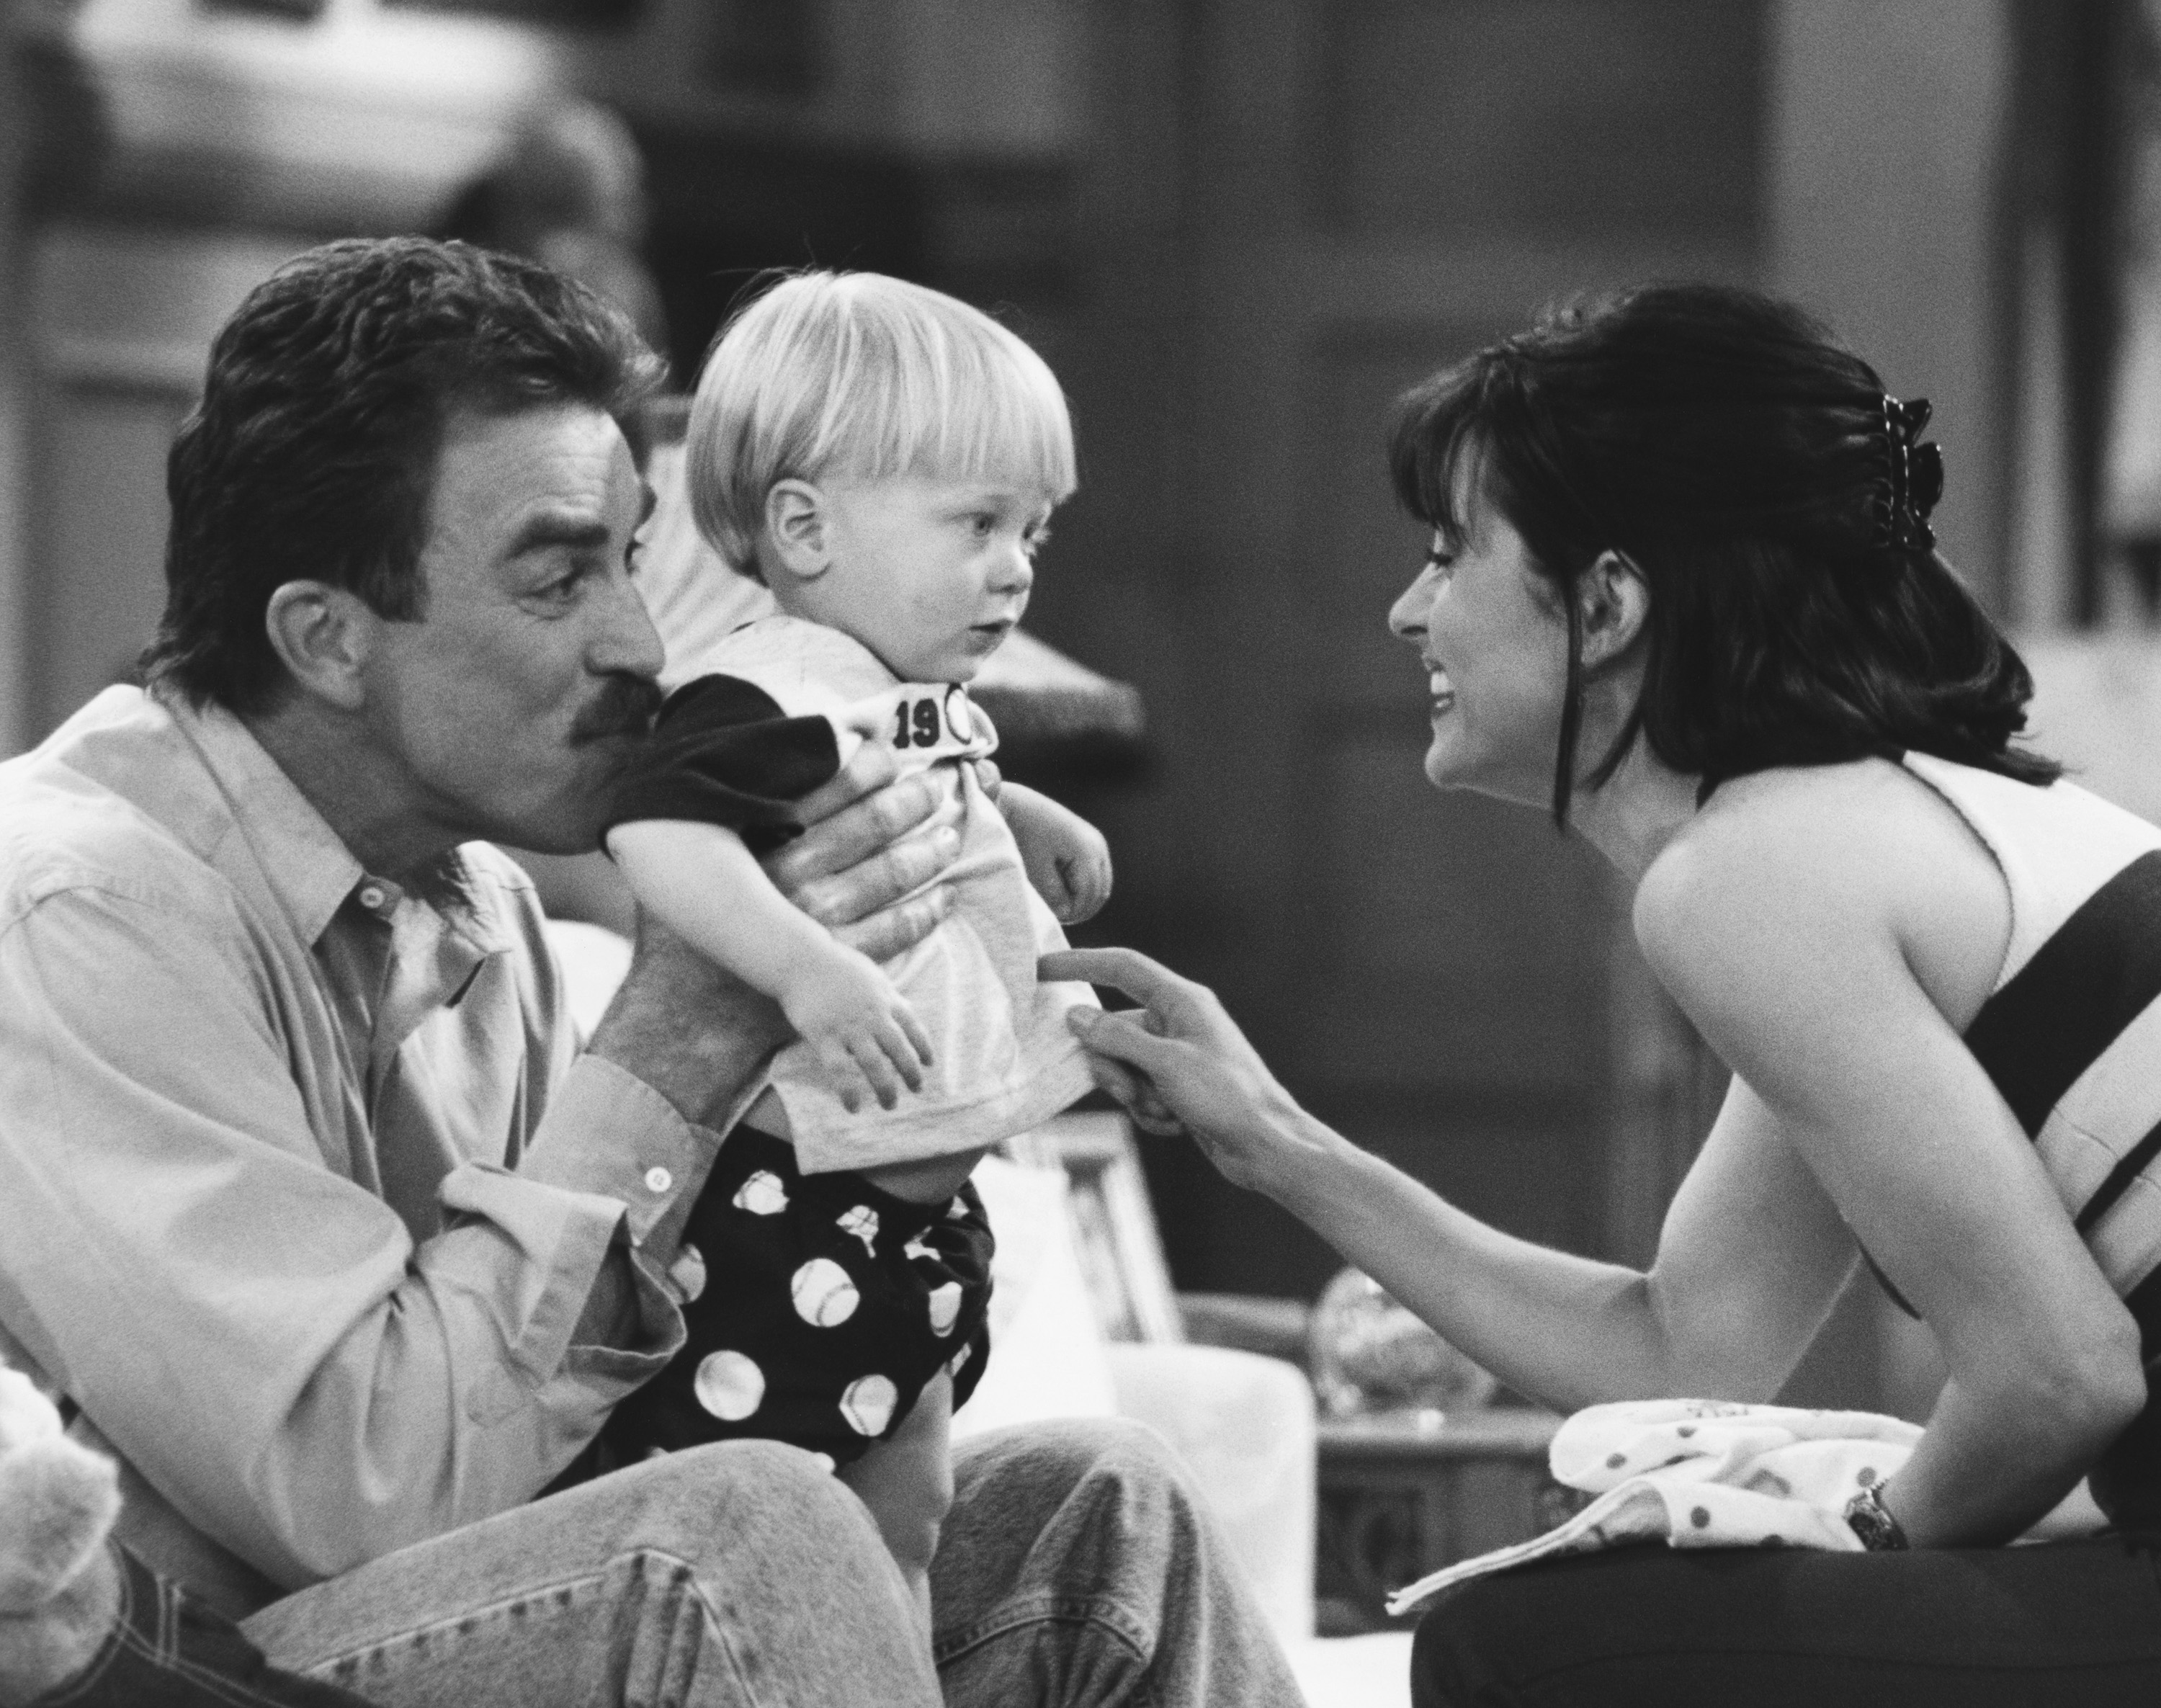 Tom Selleck (holding a baby) and Courteney Cox on the set of "Friends" on May 16, 1996 | Source: Getty Images